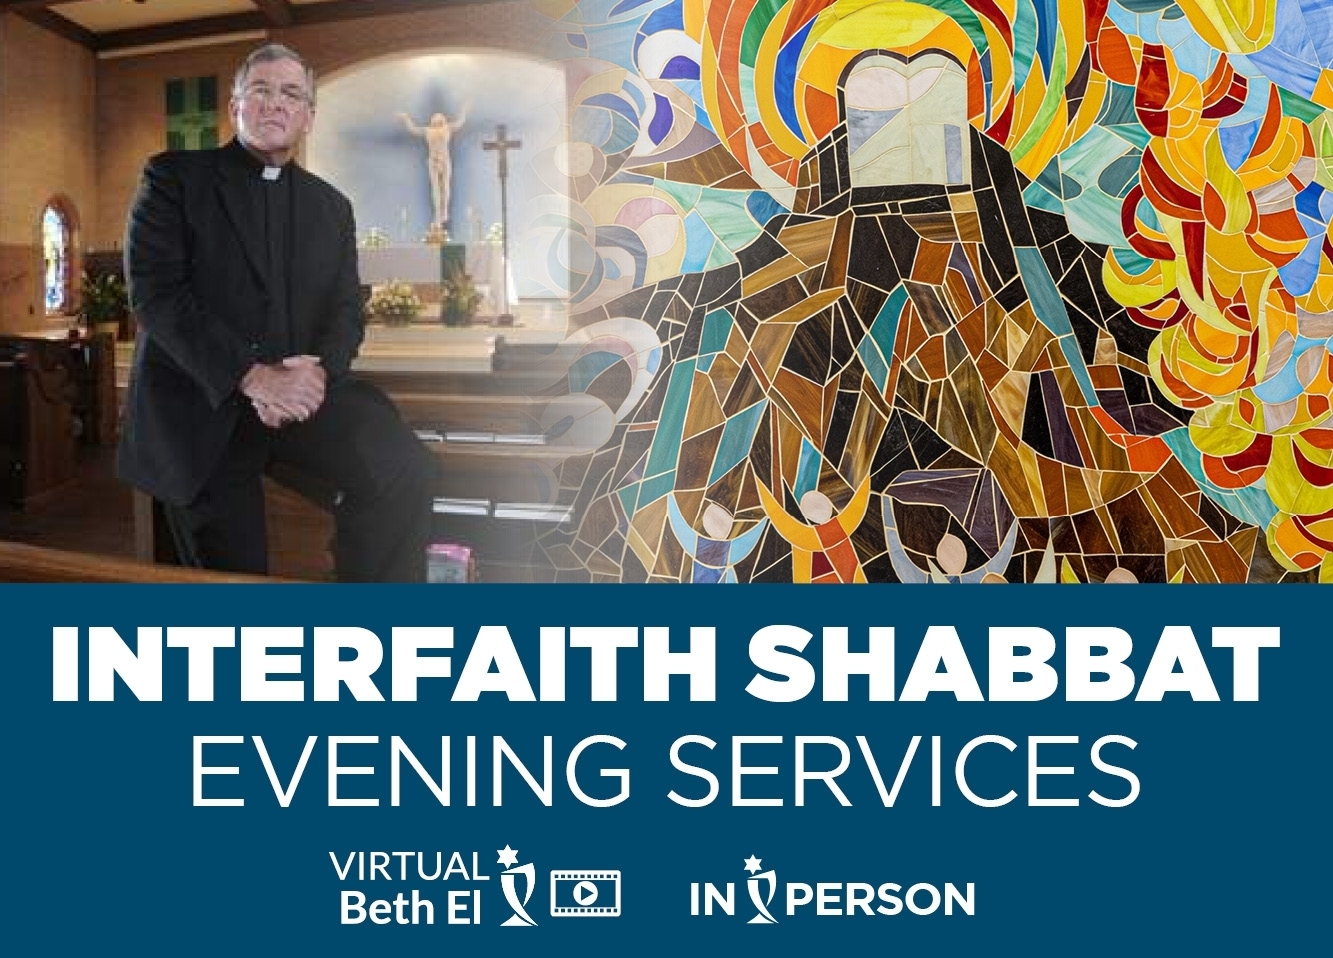 Interfaith Shabbat Services event graphic for Temple Beth El of Boca Raton in collaboration with St. Joan of Arc Catholic Church